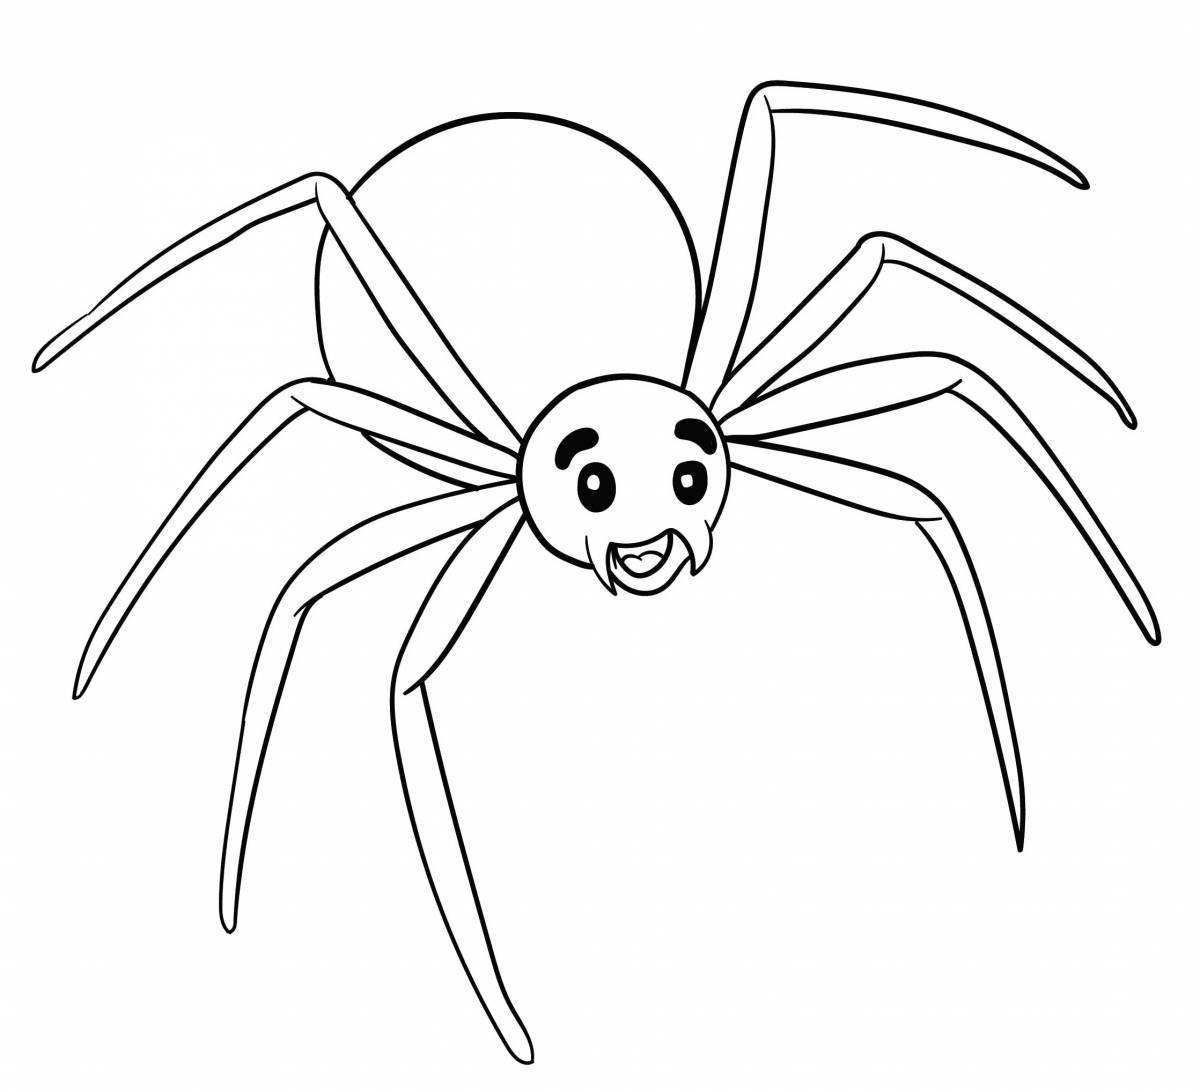 Delightful drawing of a spider